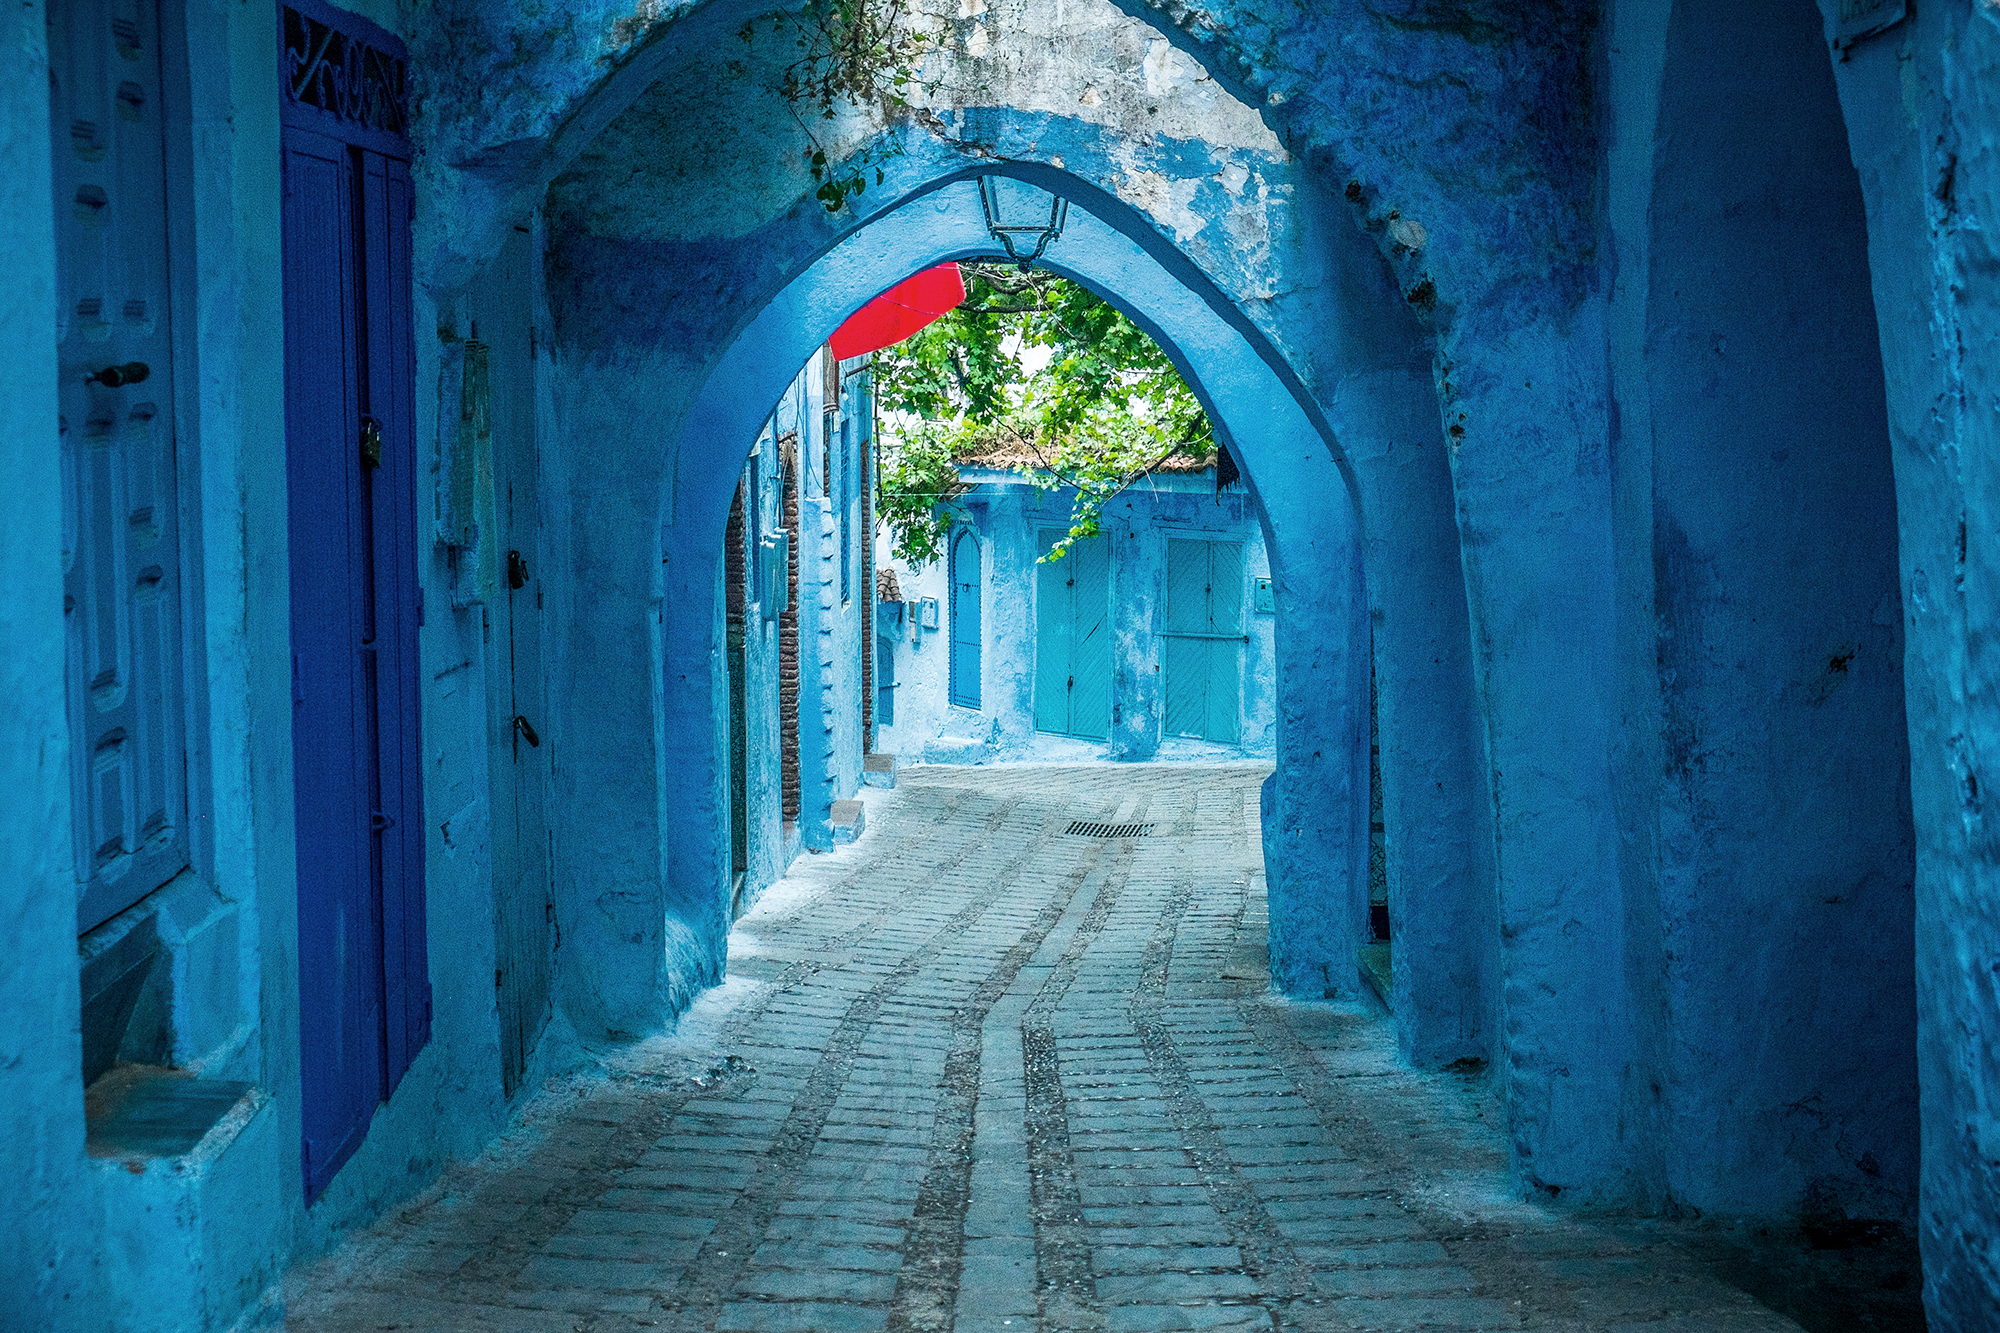 The beautiful blue medina of Chefchaouen in Morocco